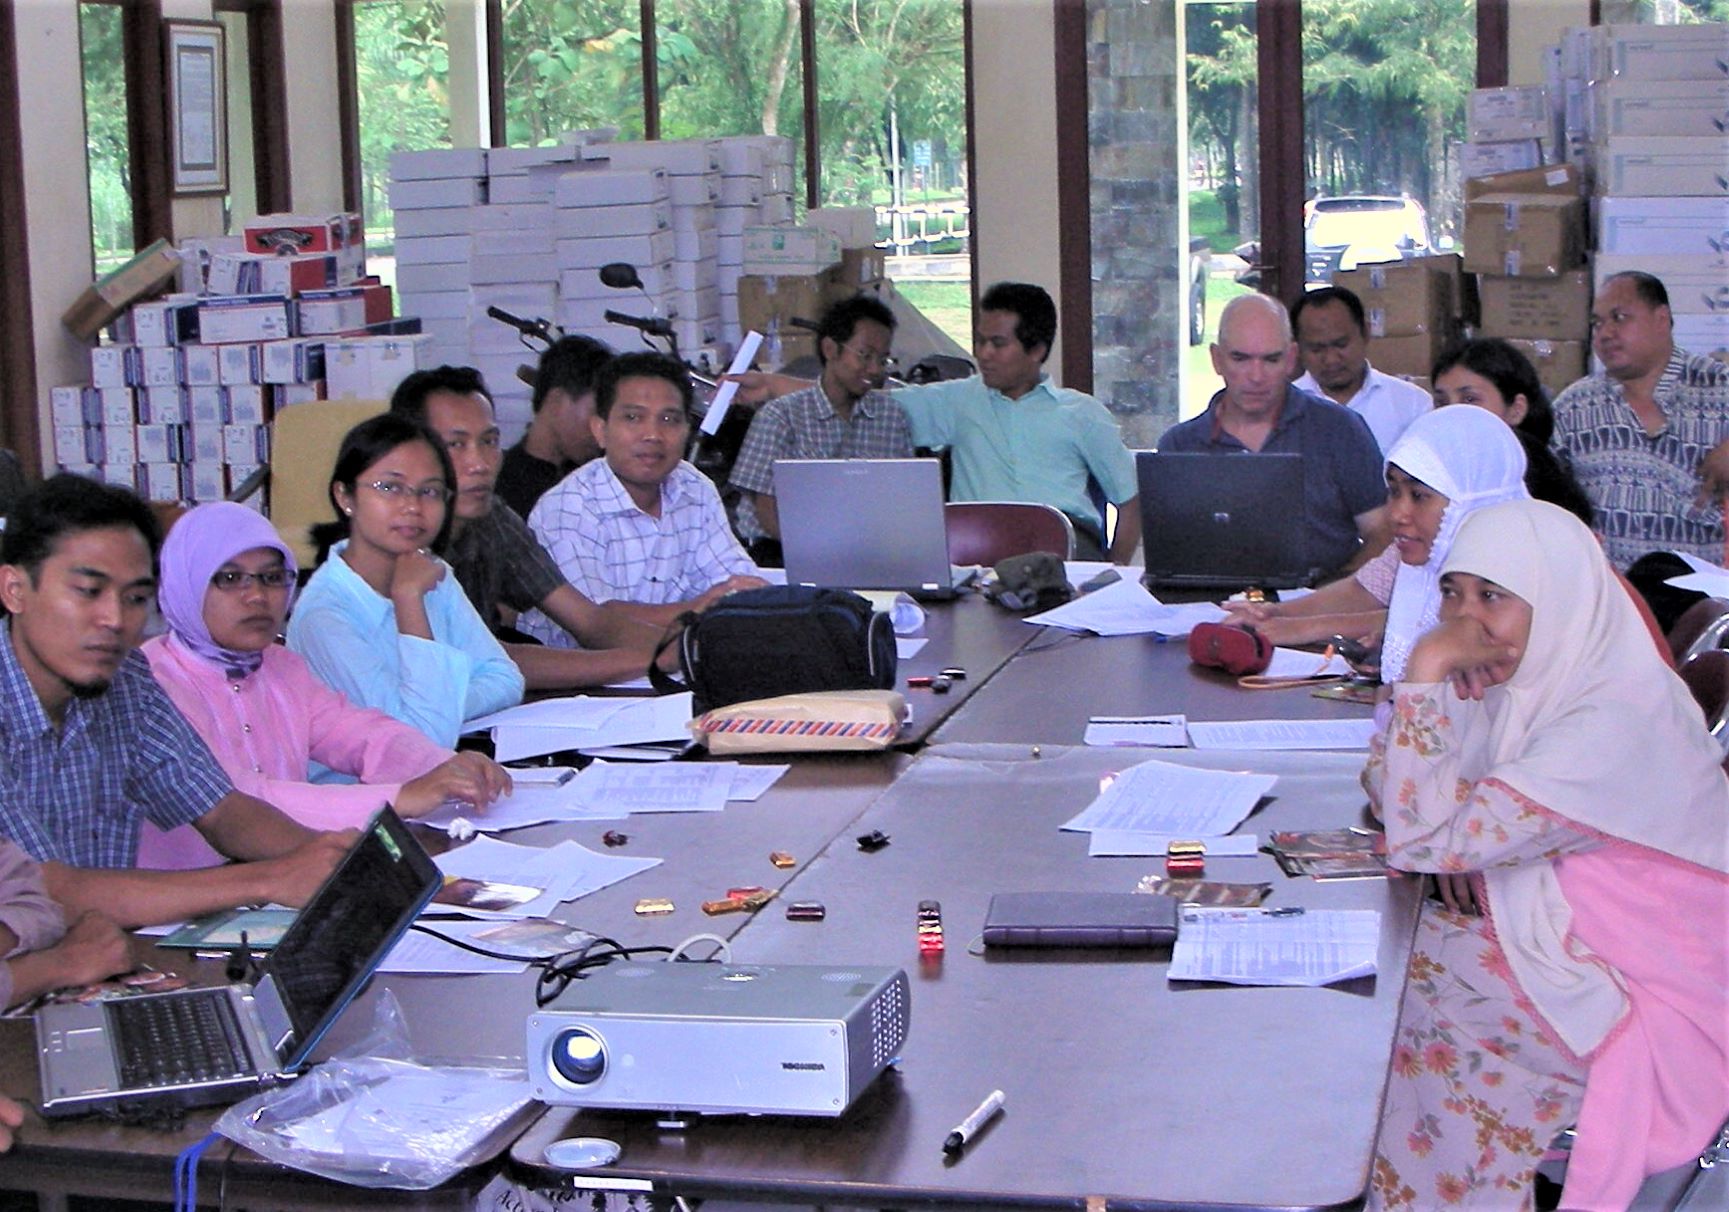 John Page at pre-conference workshop in Sumatra 2006